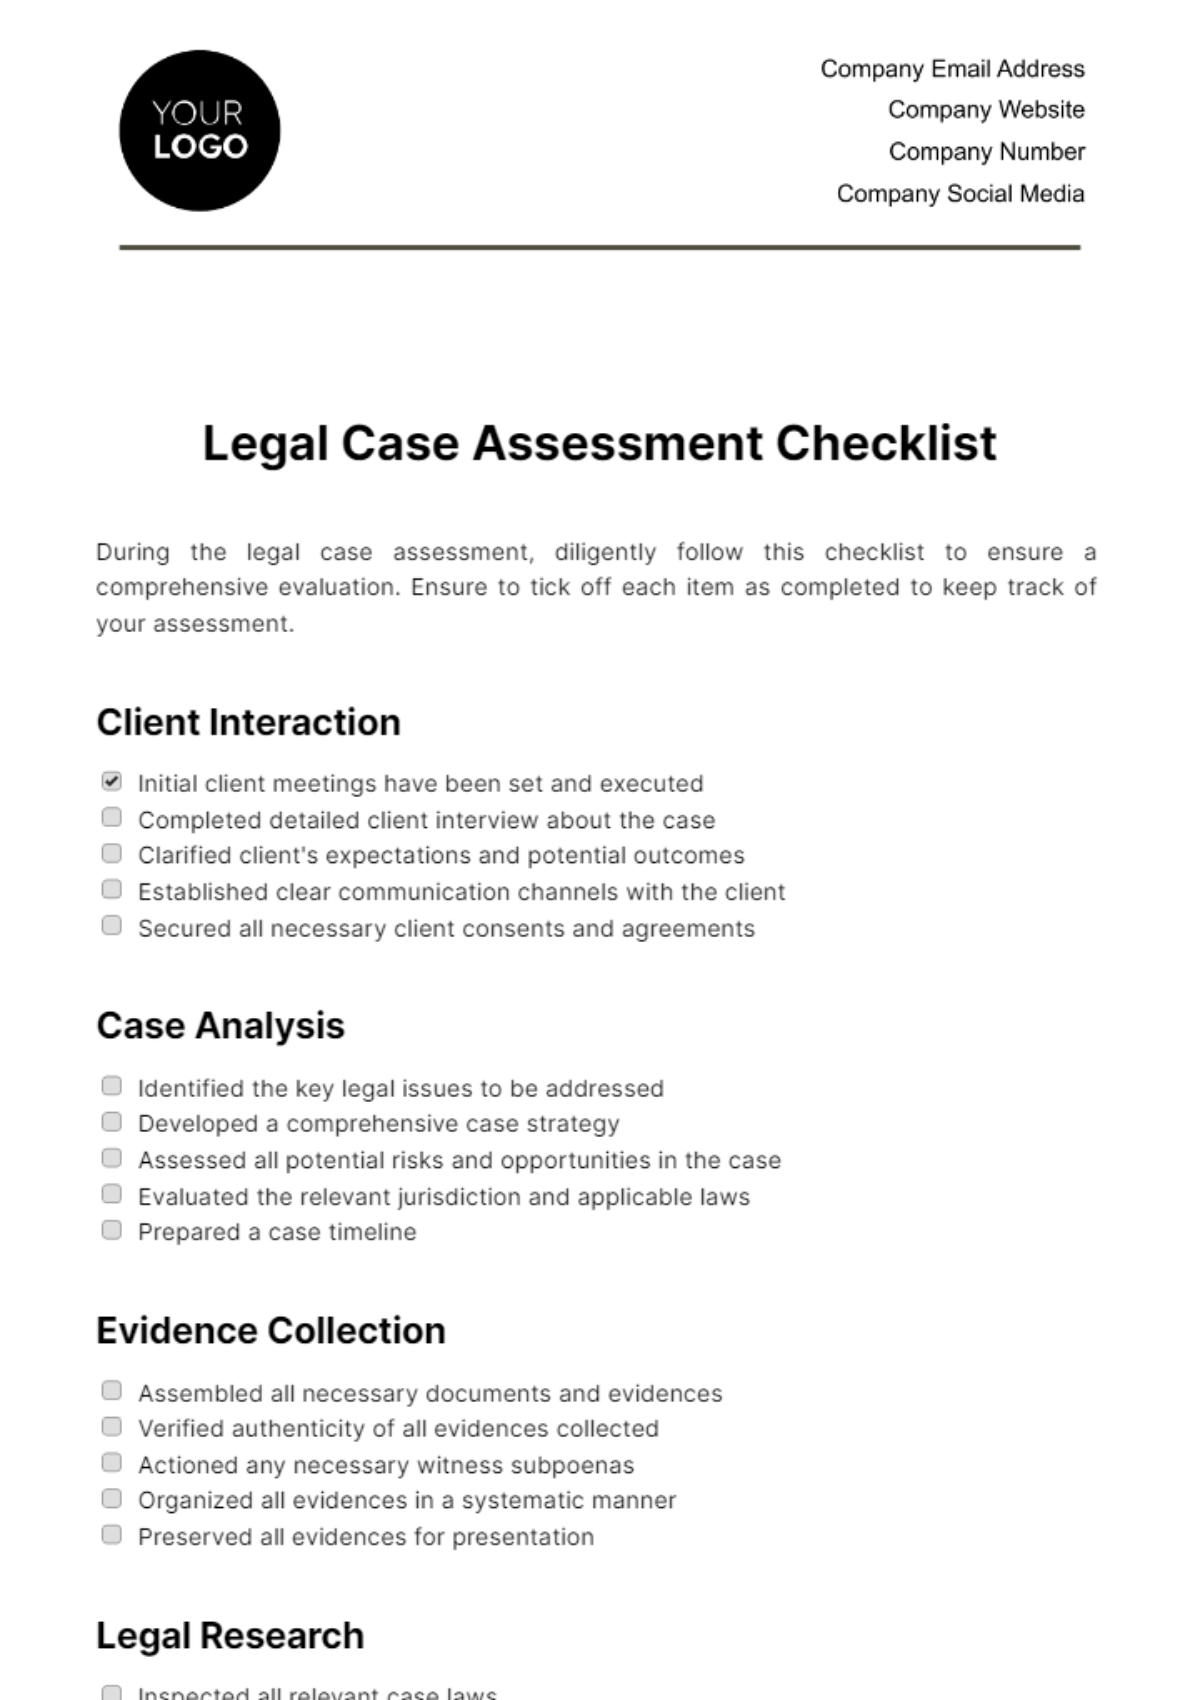 Free Legal Case Assessment Checklist Template